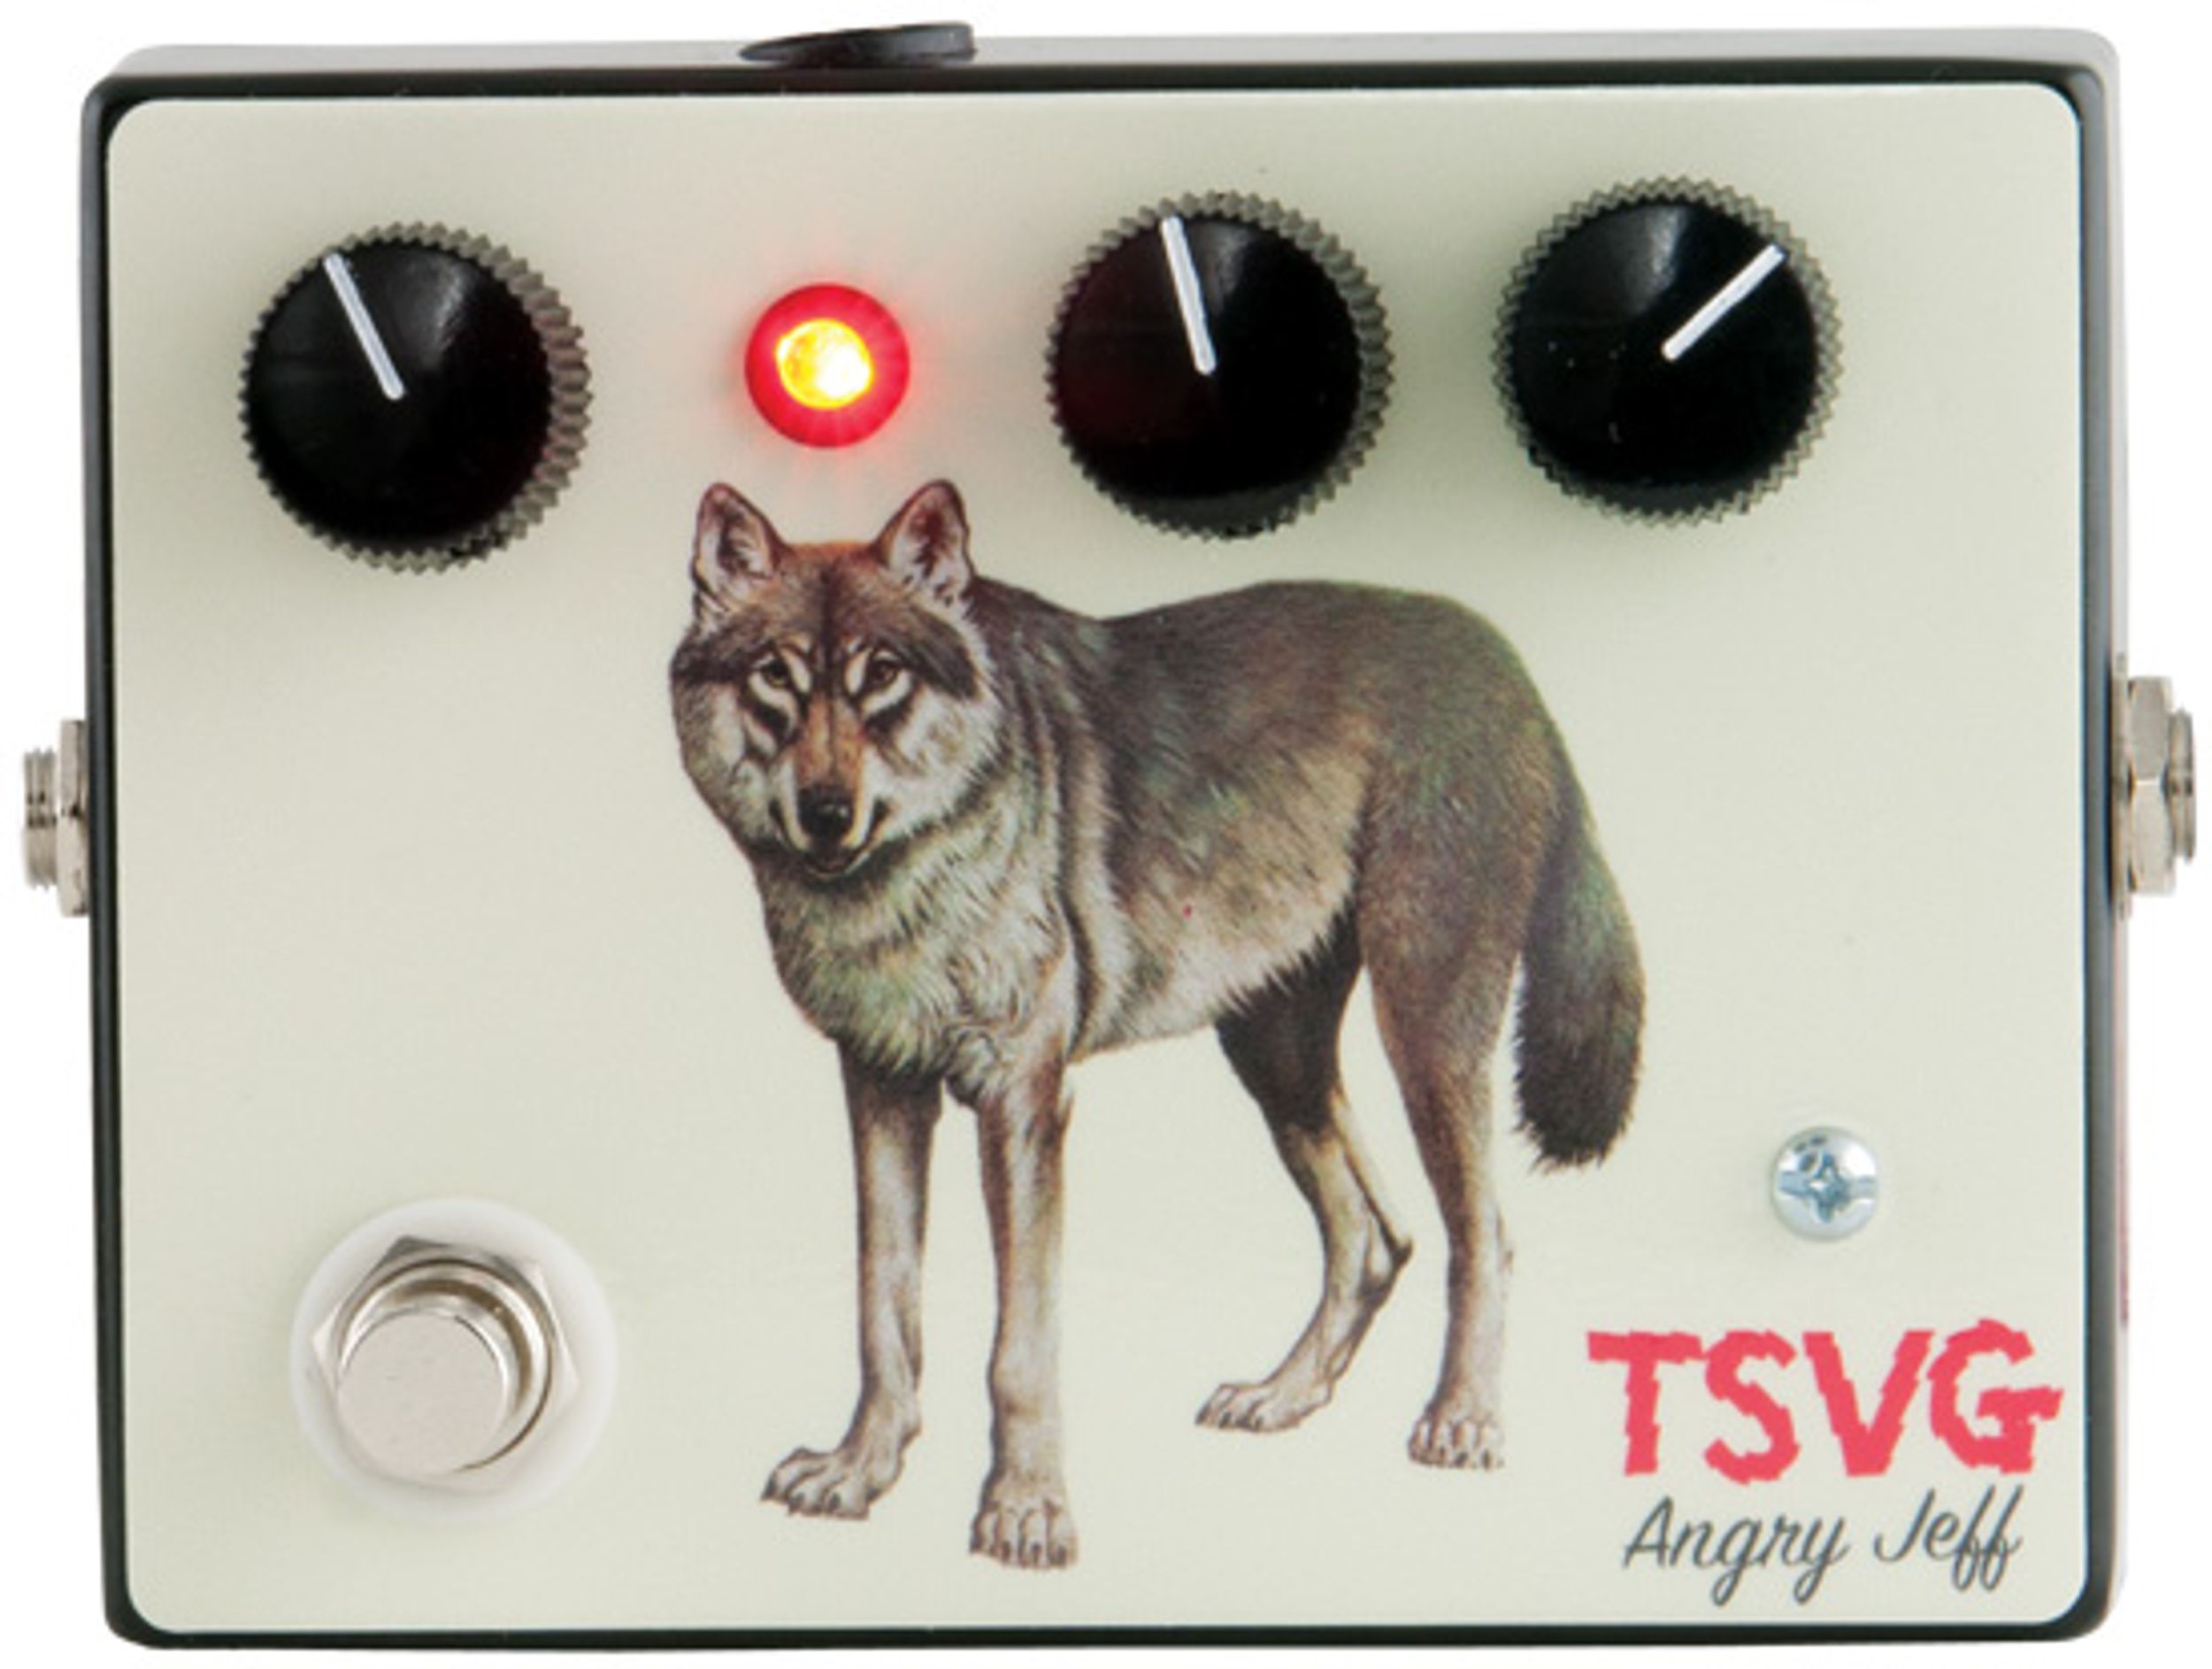 TSVG Angry Jeff Pedal Review